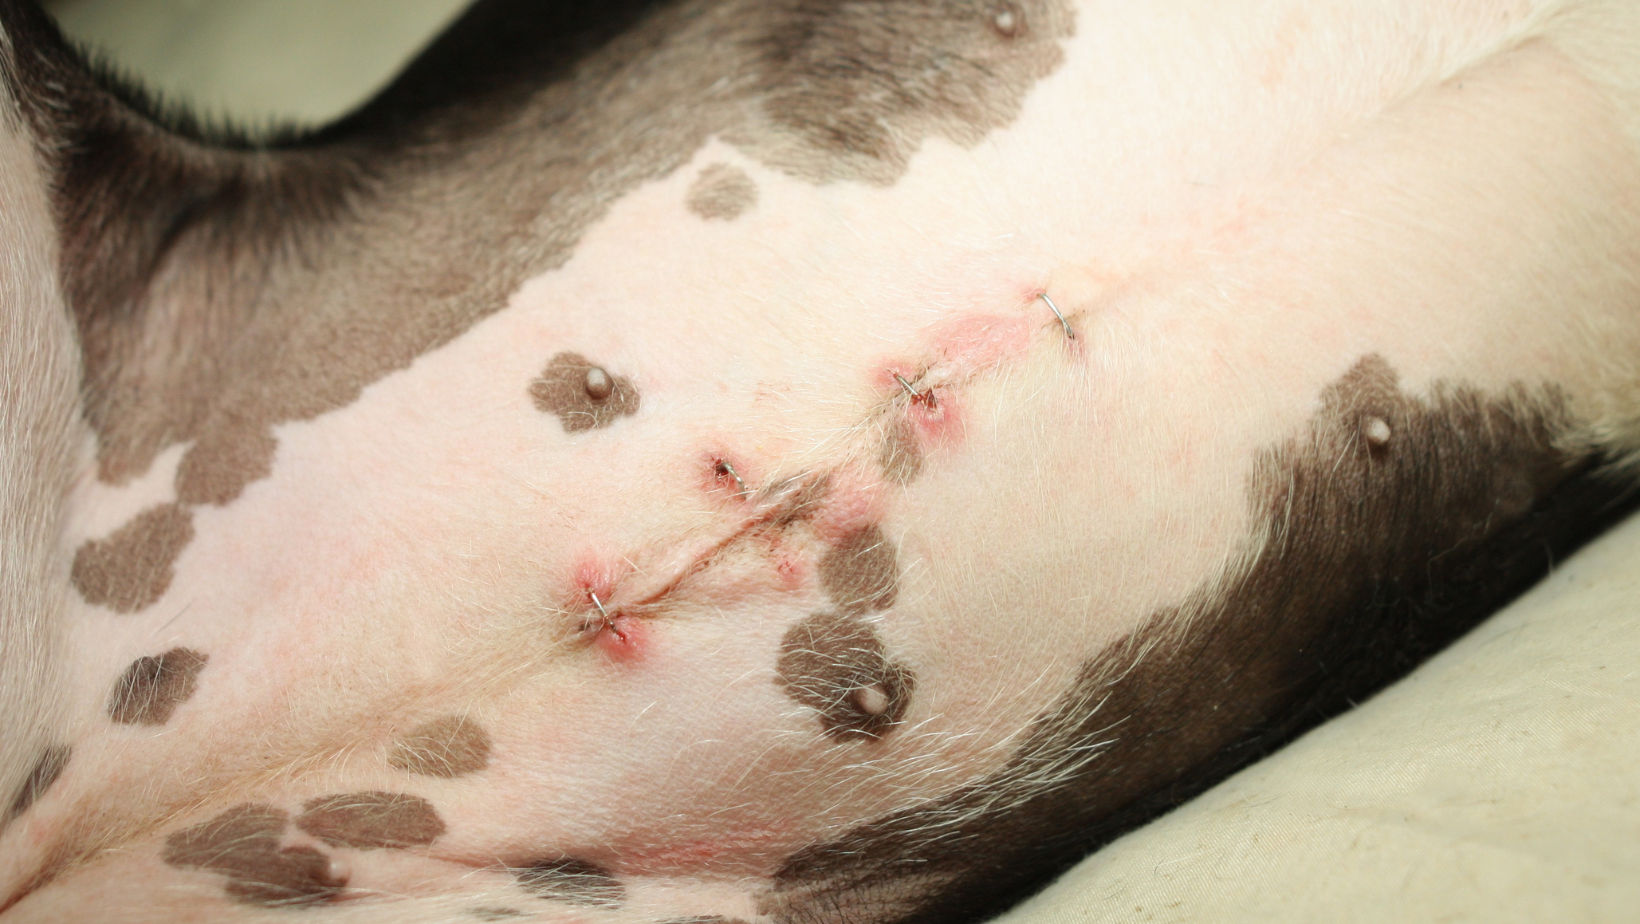 What Are the Complications After Spaying Surgery?